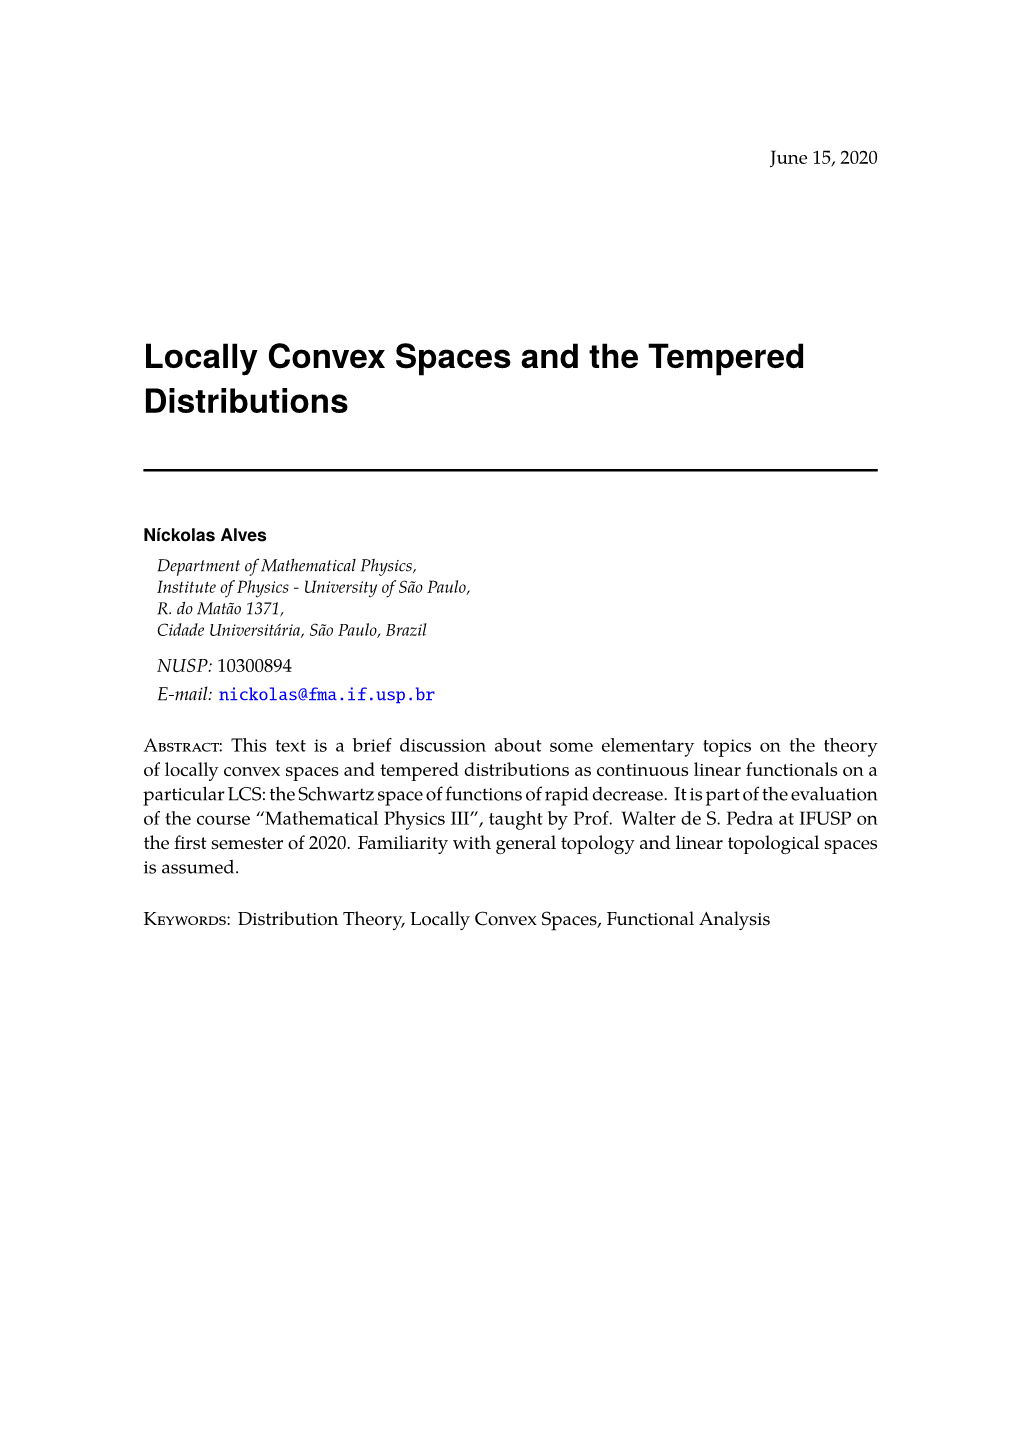 Locally Convex Spaces and the Tempered Distributions